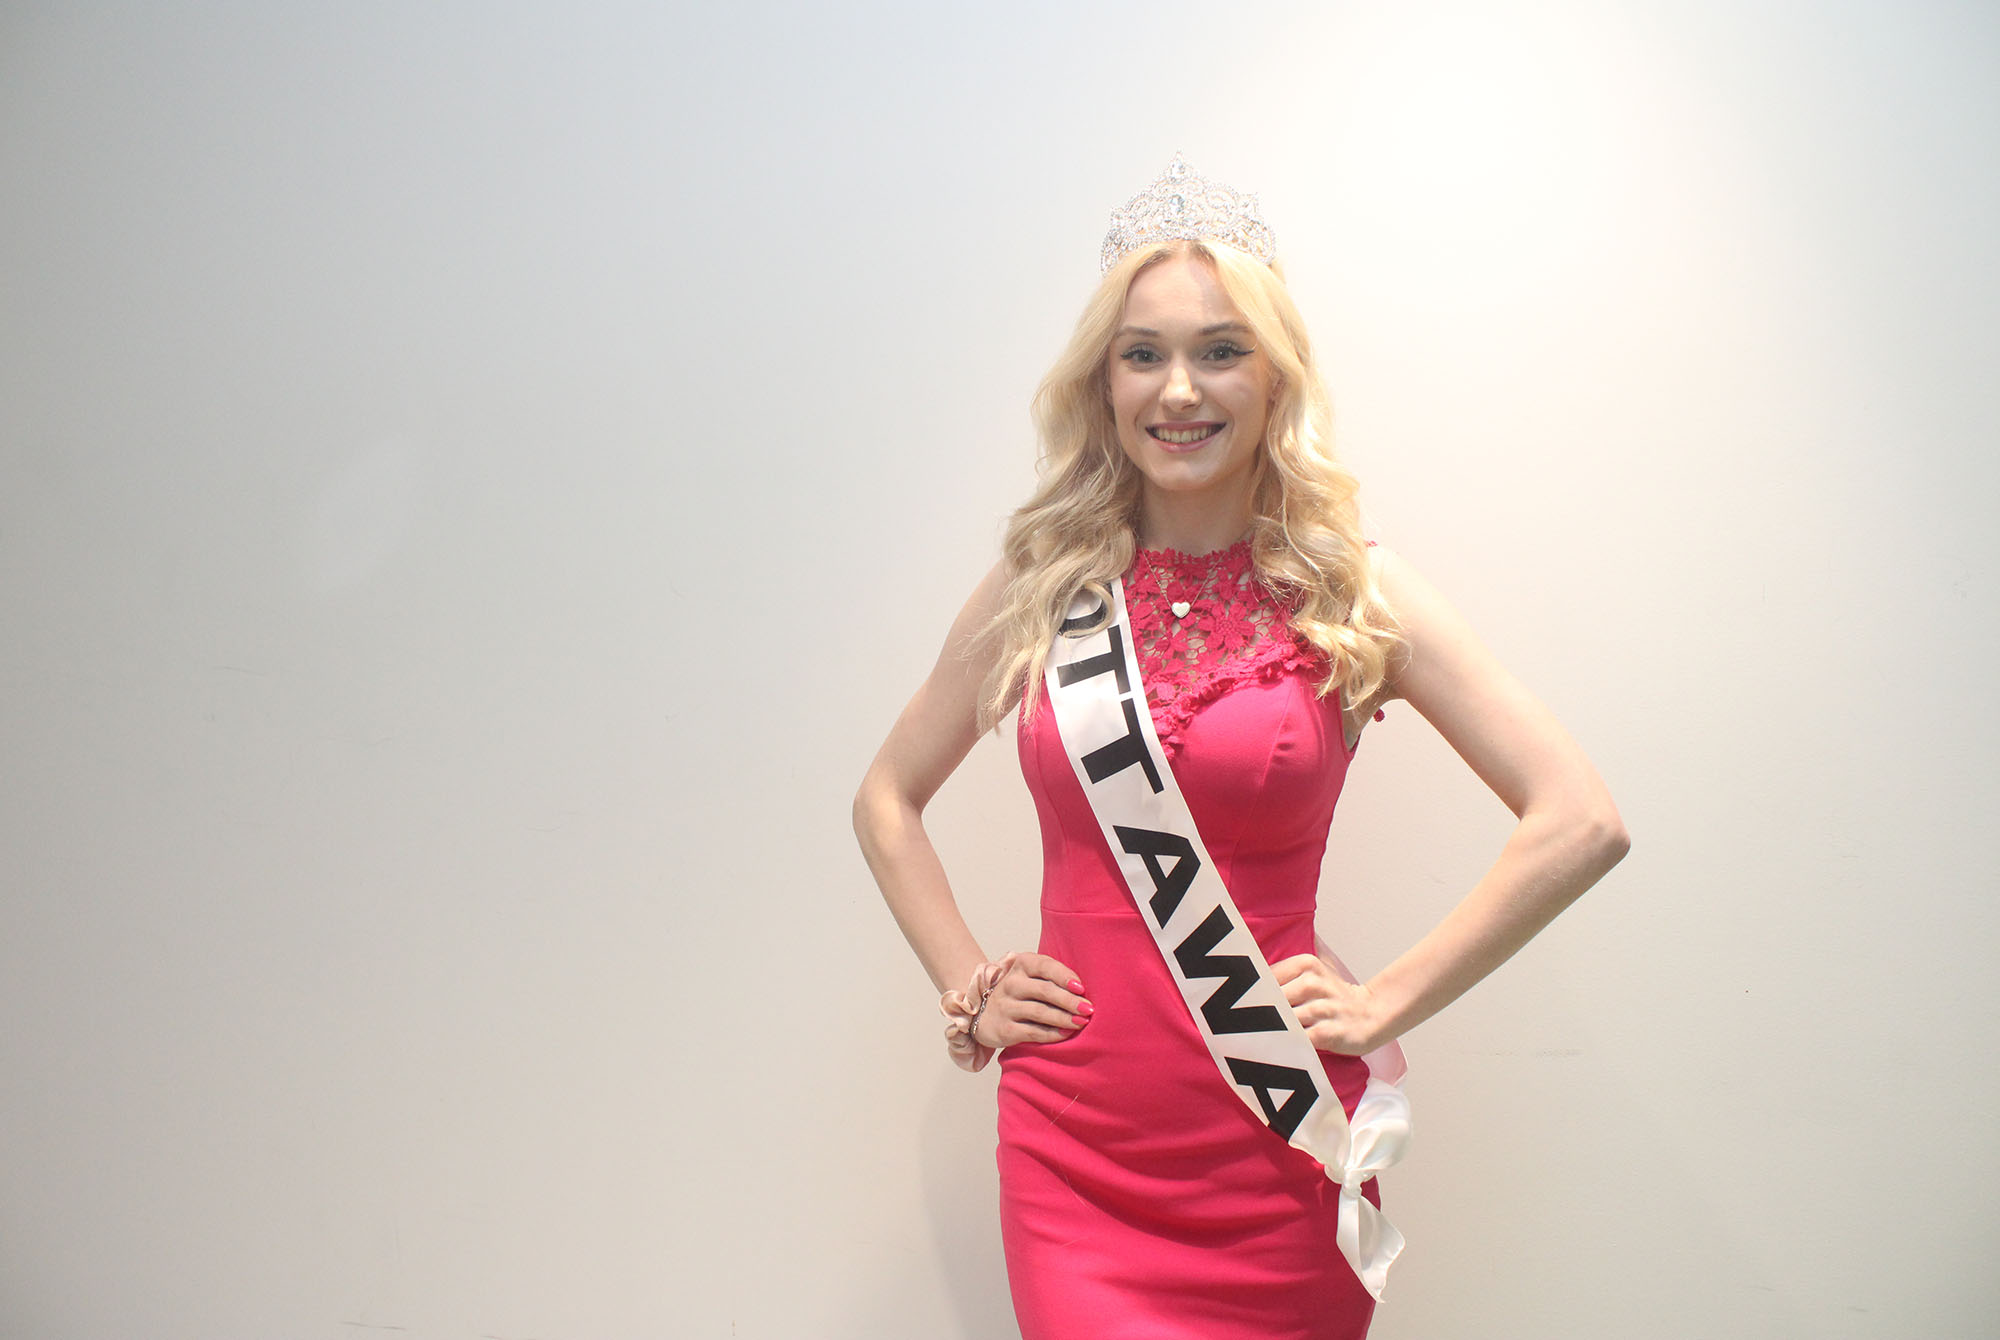 Sophia Wojdak, an AC student, was second runner-up at the Ontario Regional Canada Pageant